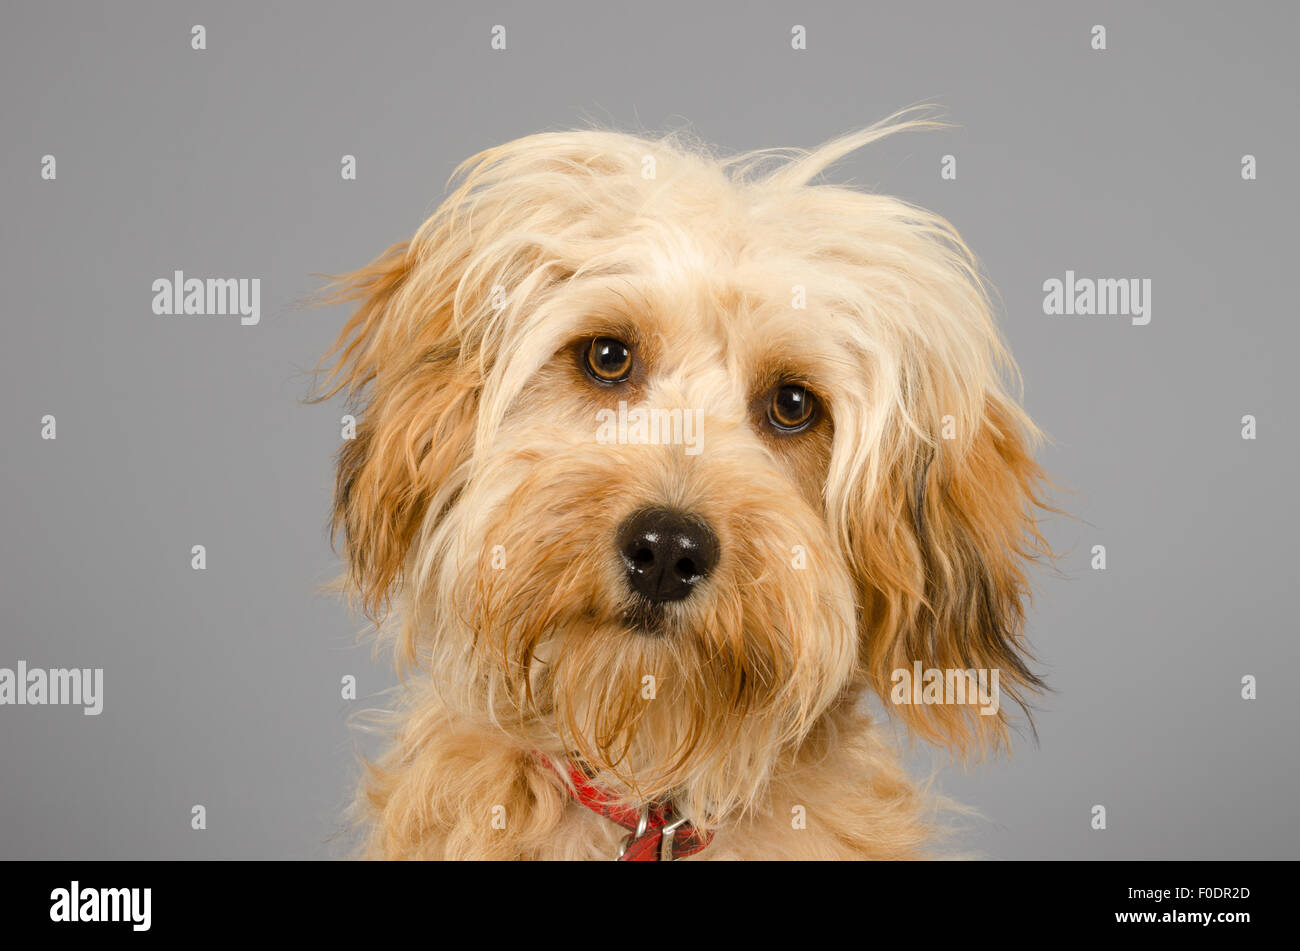 dog with long messy hair on grey background Stock Photo